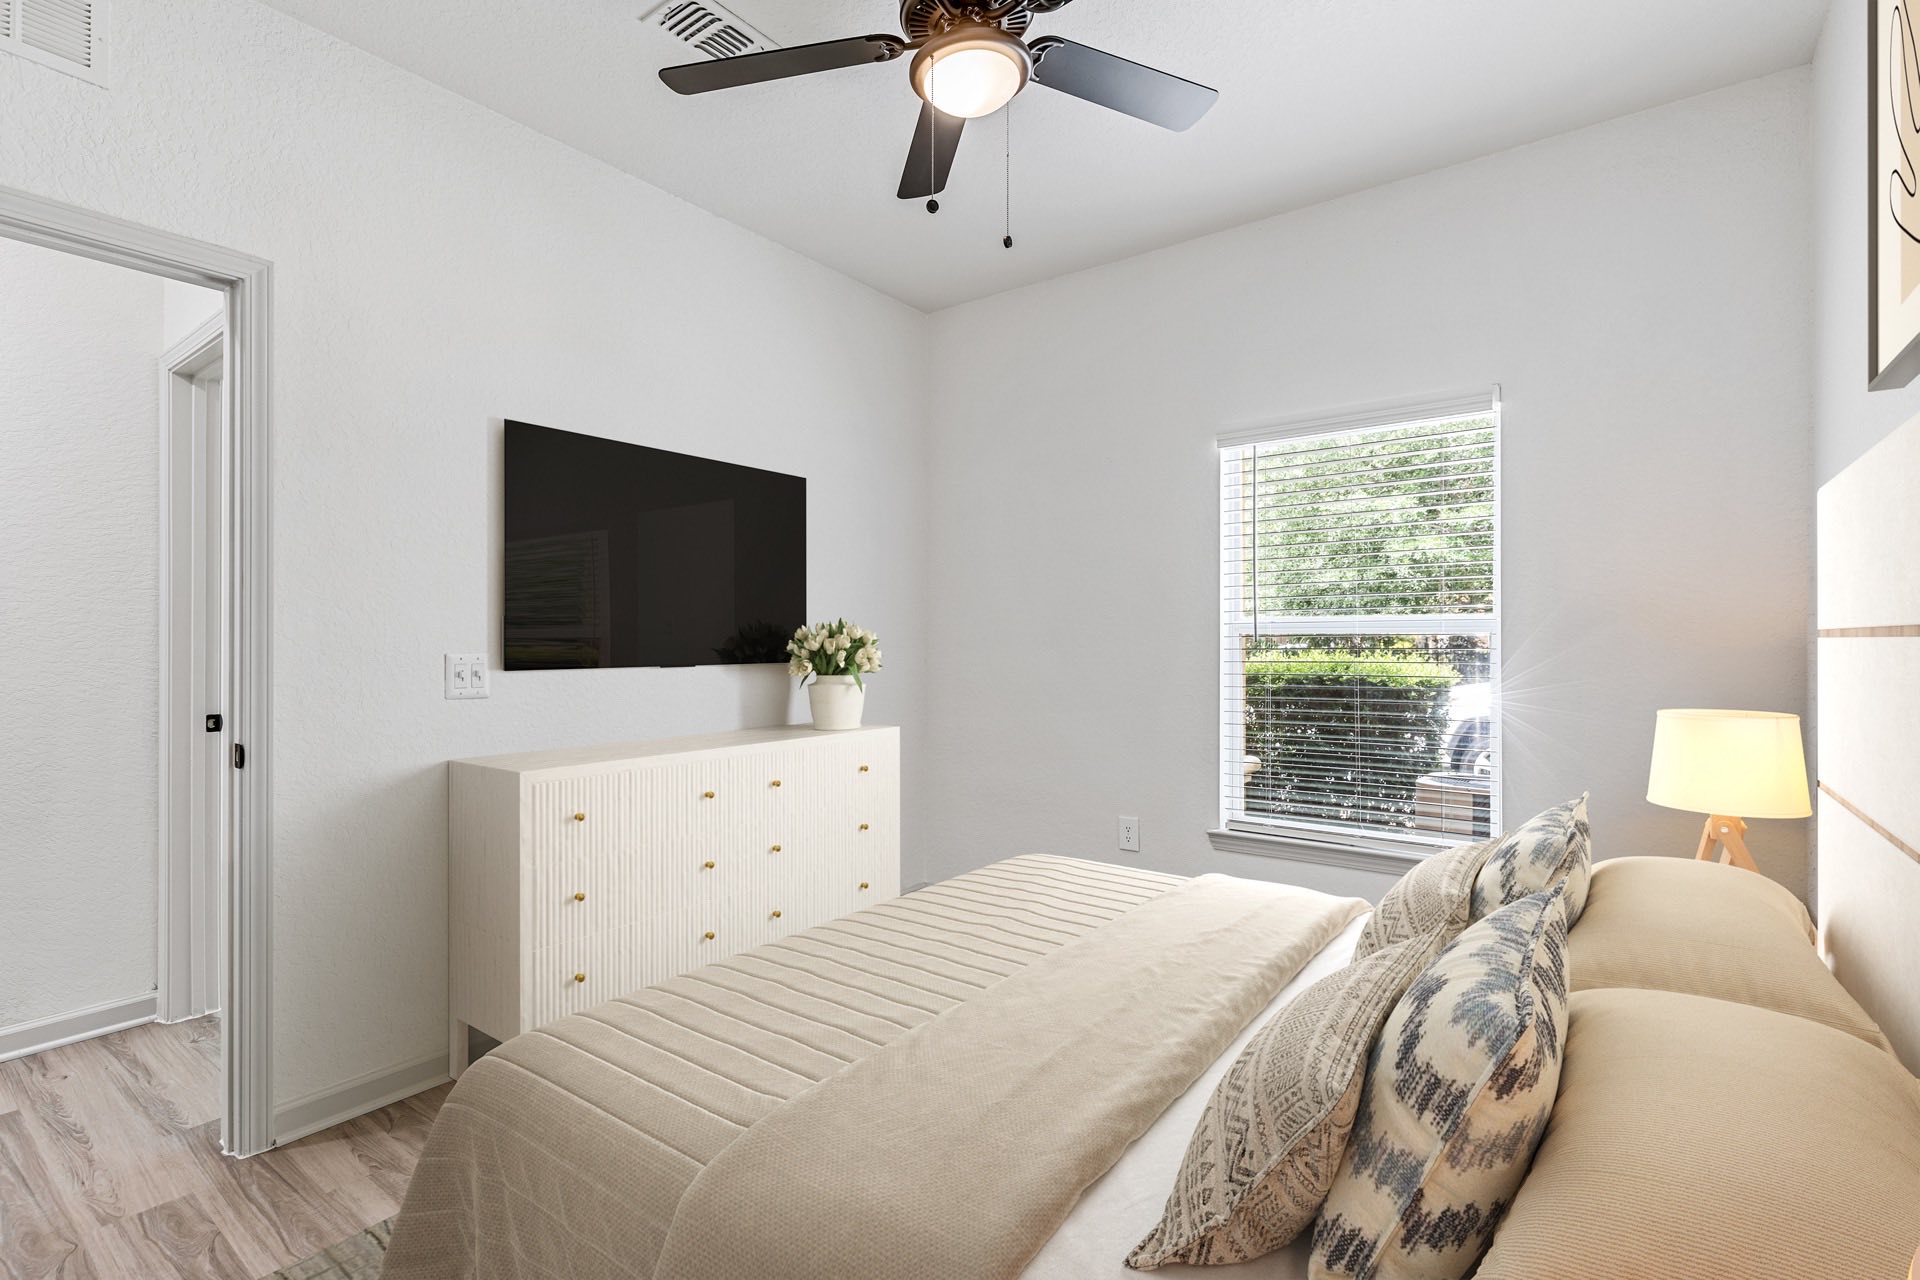 bedroom with medium sized window, wood style flooring, and mounted flat screen TV.